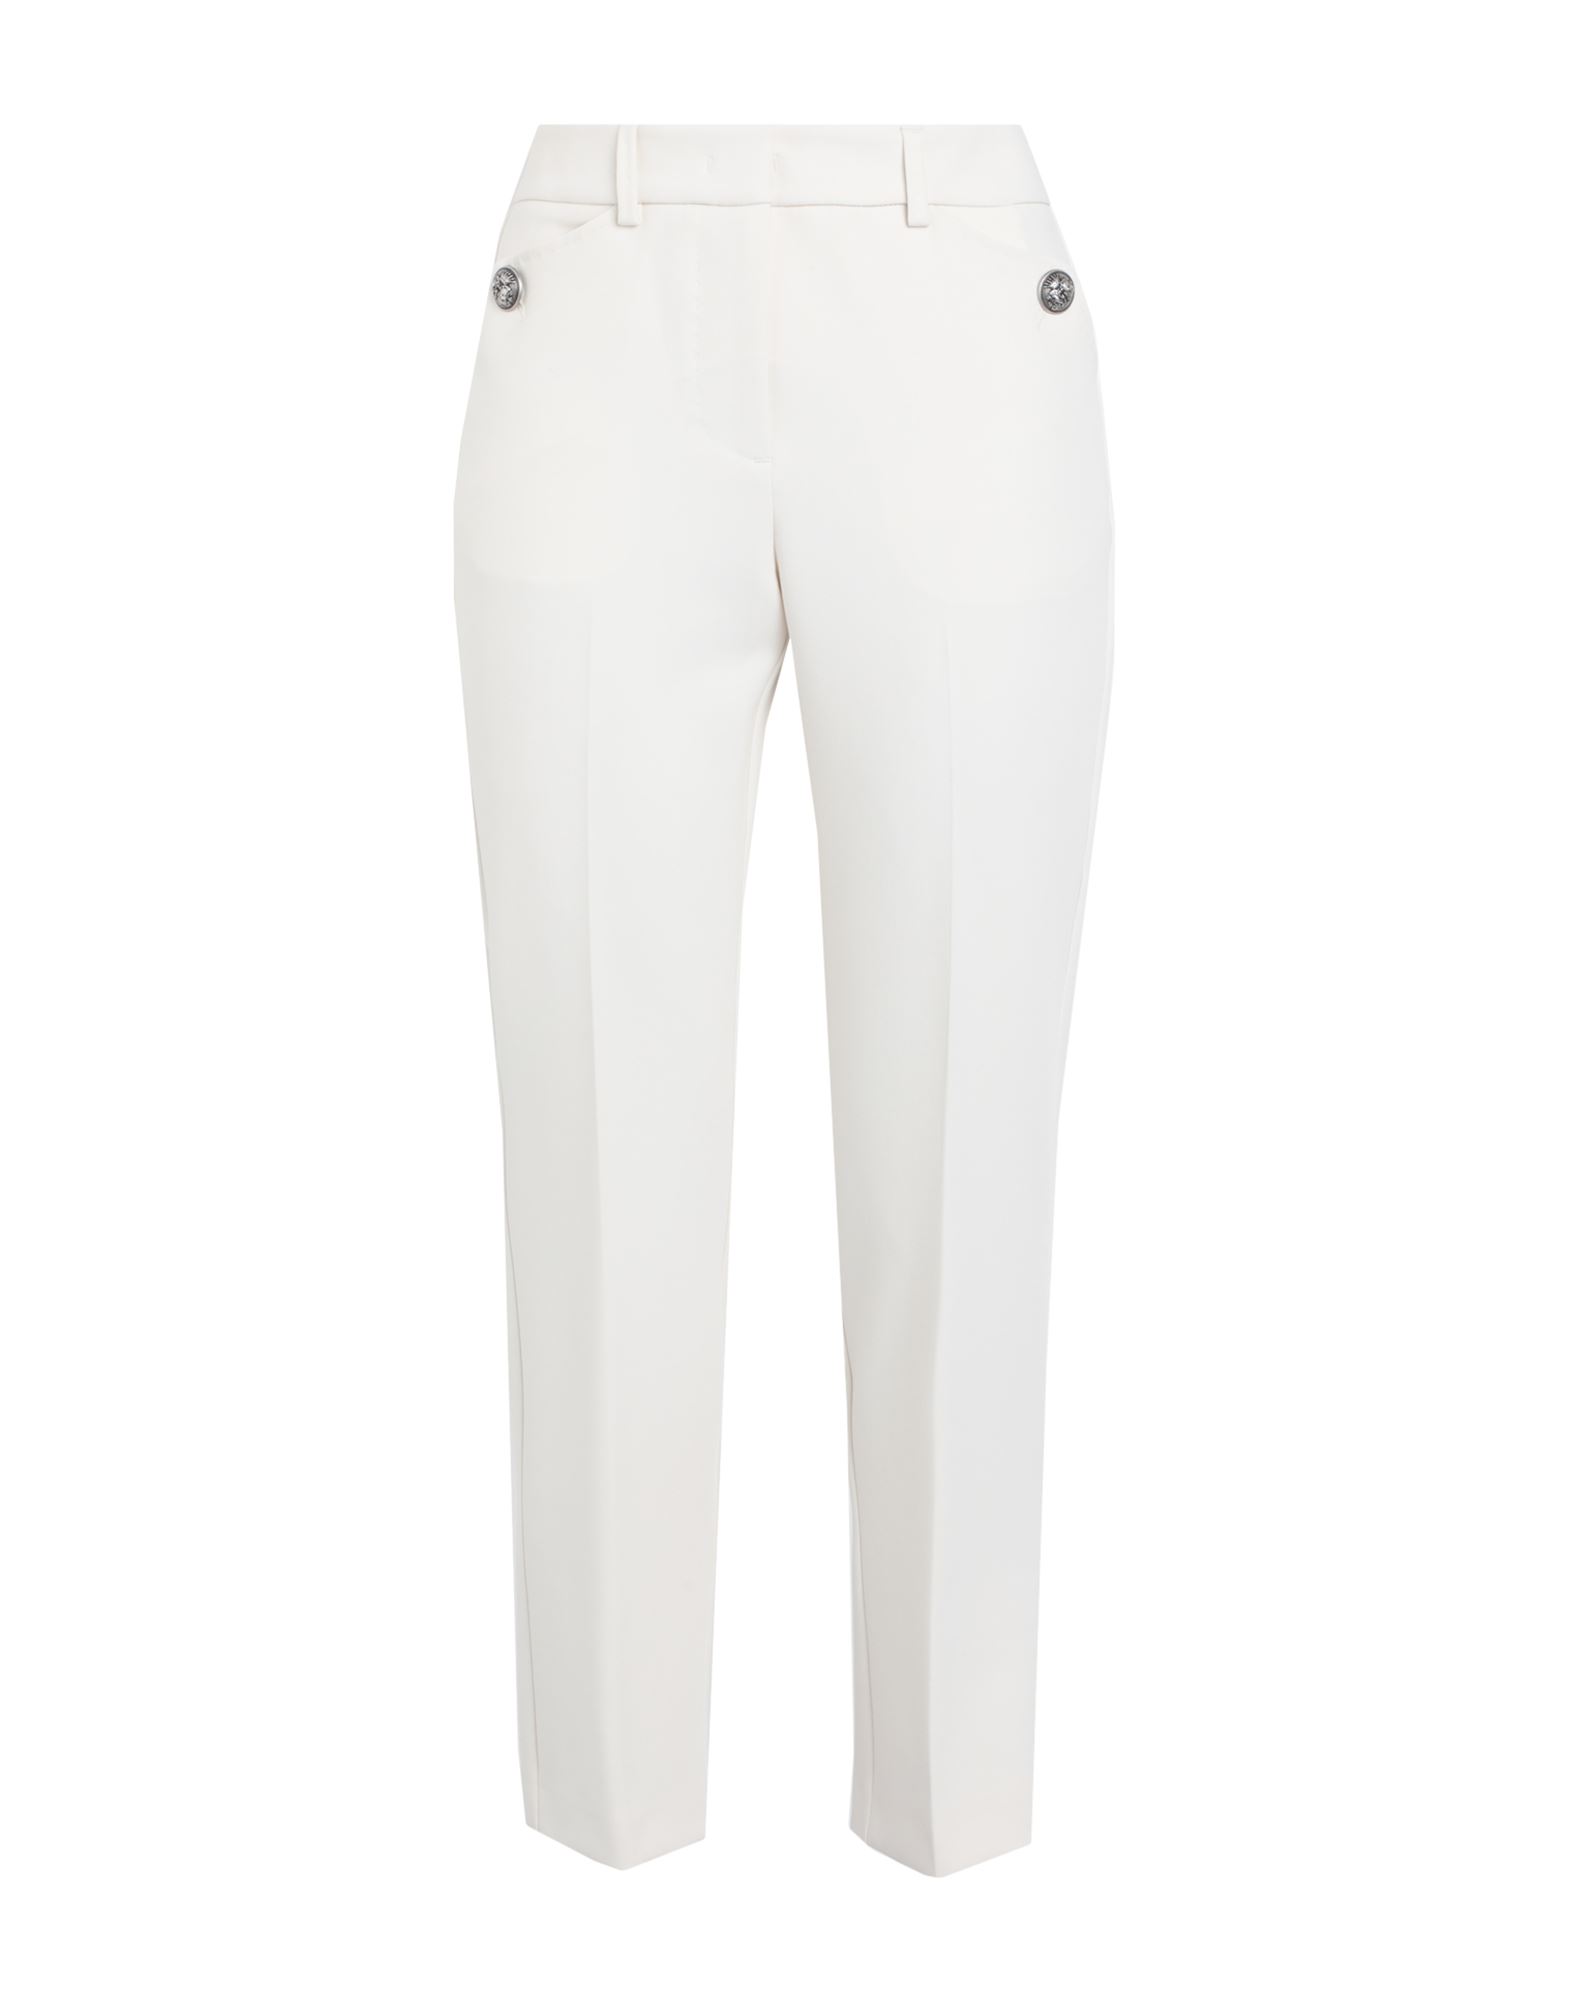 Max & Co . Woman Pants Ivory Size 4 Polyester, Viscose, Elastane In White